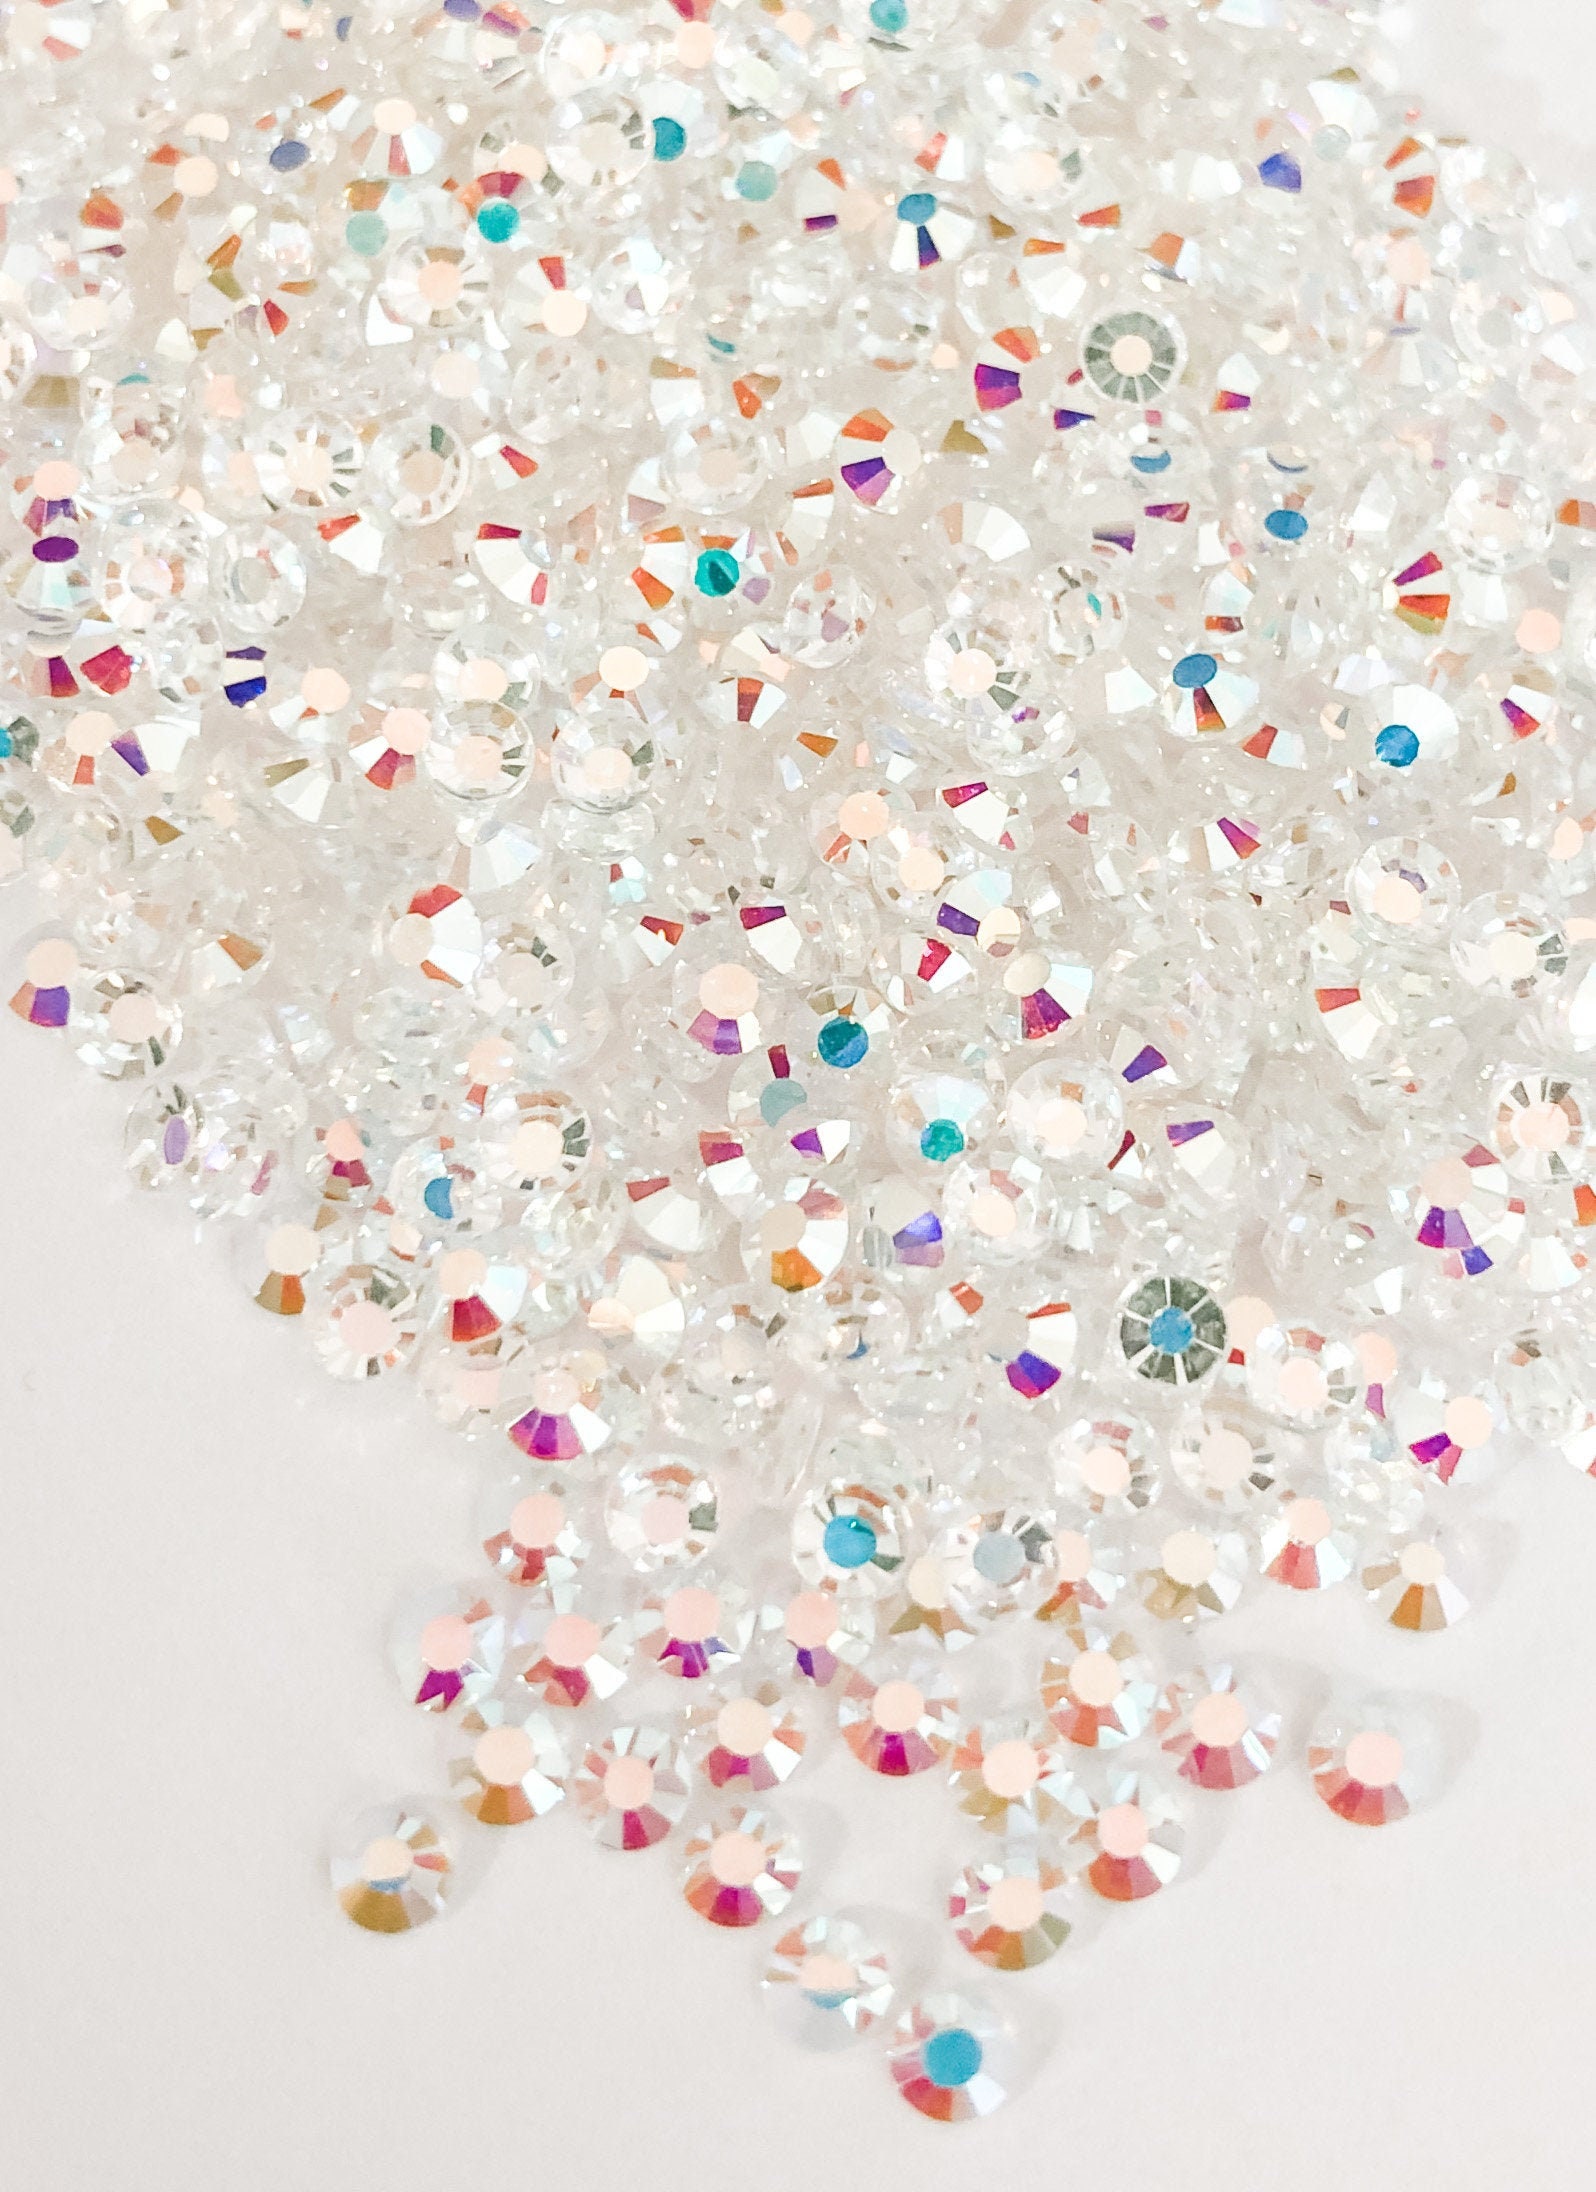 1440 Pieces mixed Size Super Shiny Crystal Clear Rhinestones